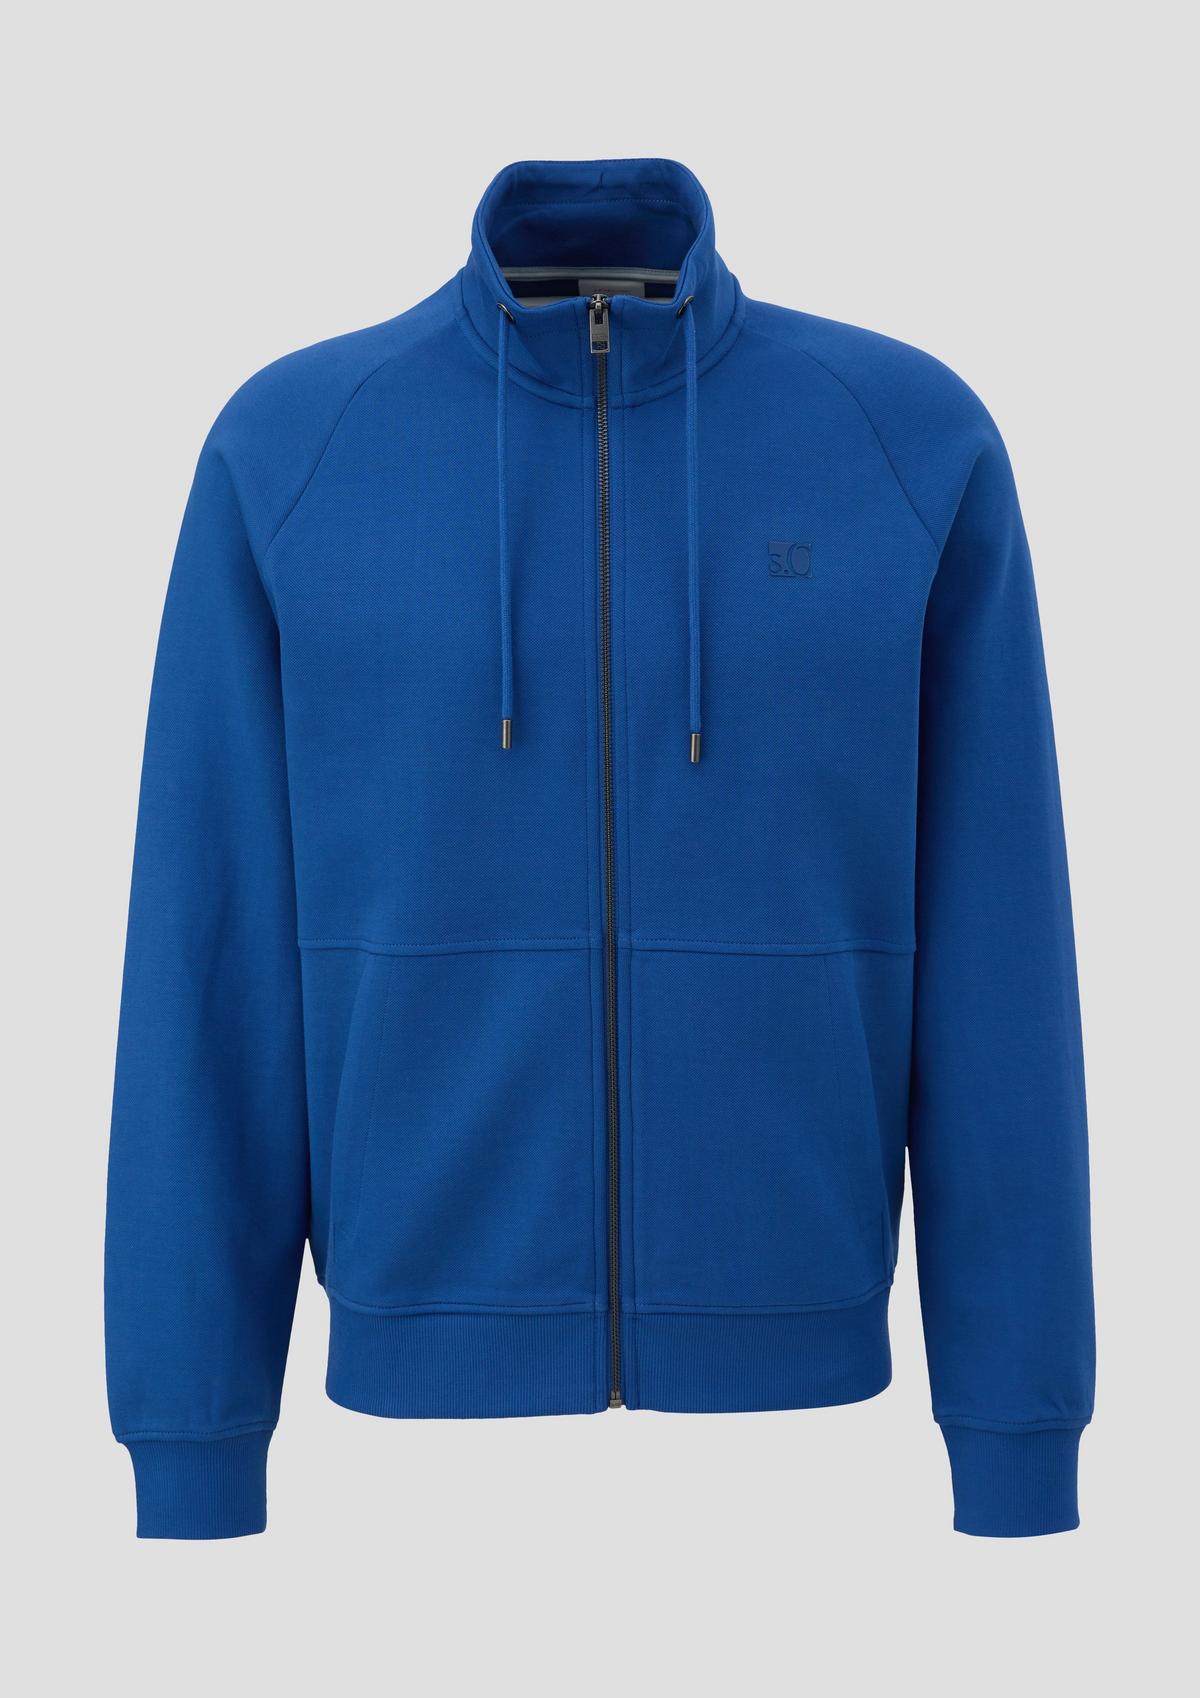 s.Oliver Sweatshirt jacket with a stand-up collar